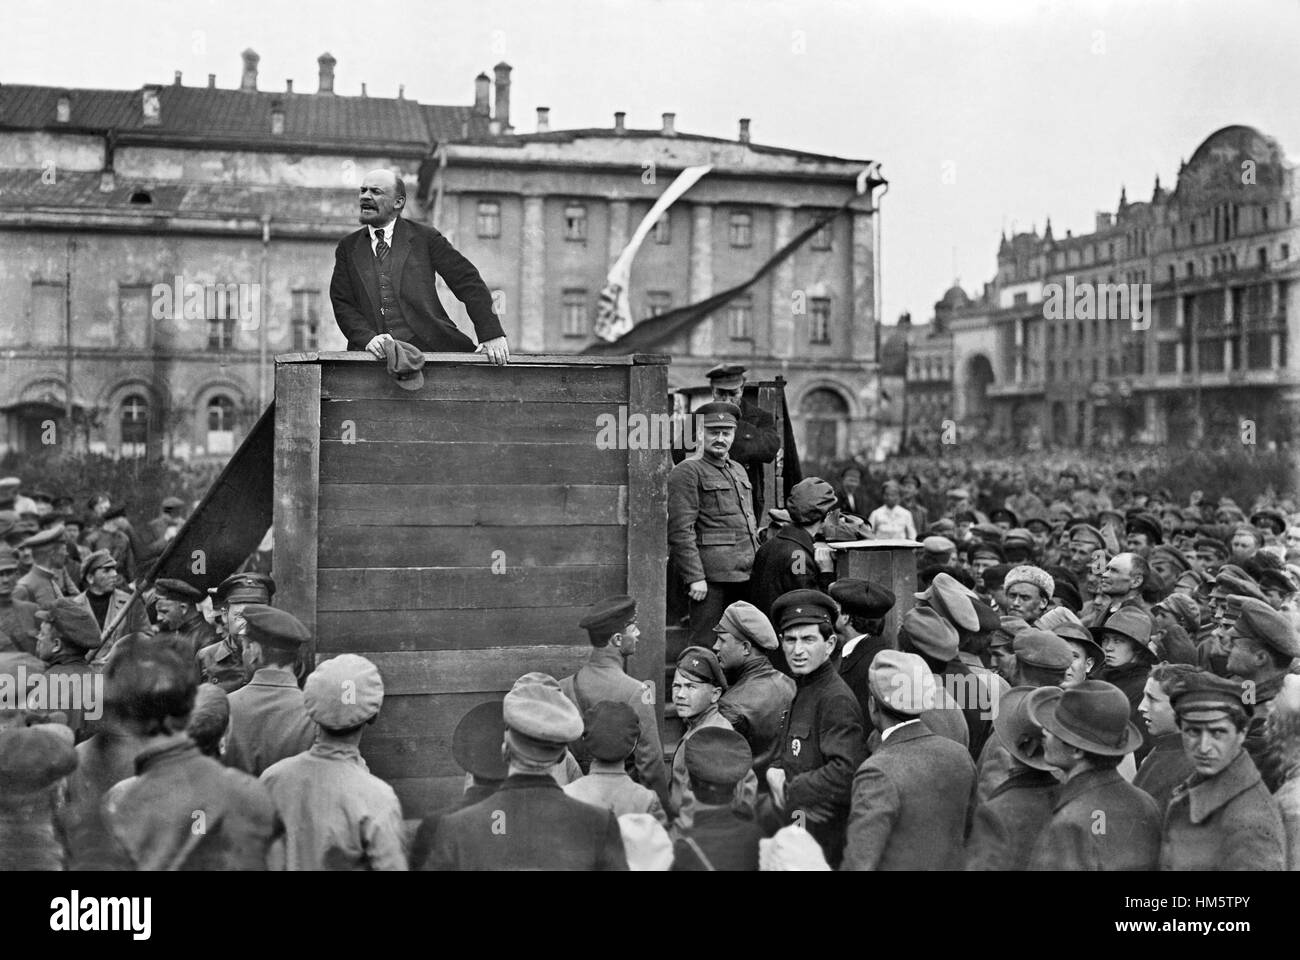 VLADIMIR LENIN (1870-1924) making a speech in  Sverdlov Square, Moscow, 5 May 1920. On the steps to the right stands Trotsky with Kamenev behind him. Under Stalin's orders the latter two were edited out of the photo. Stock Photo